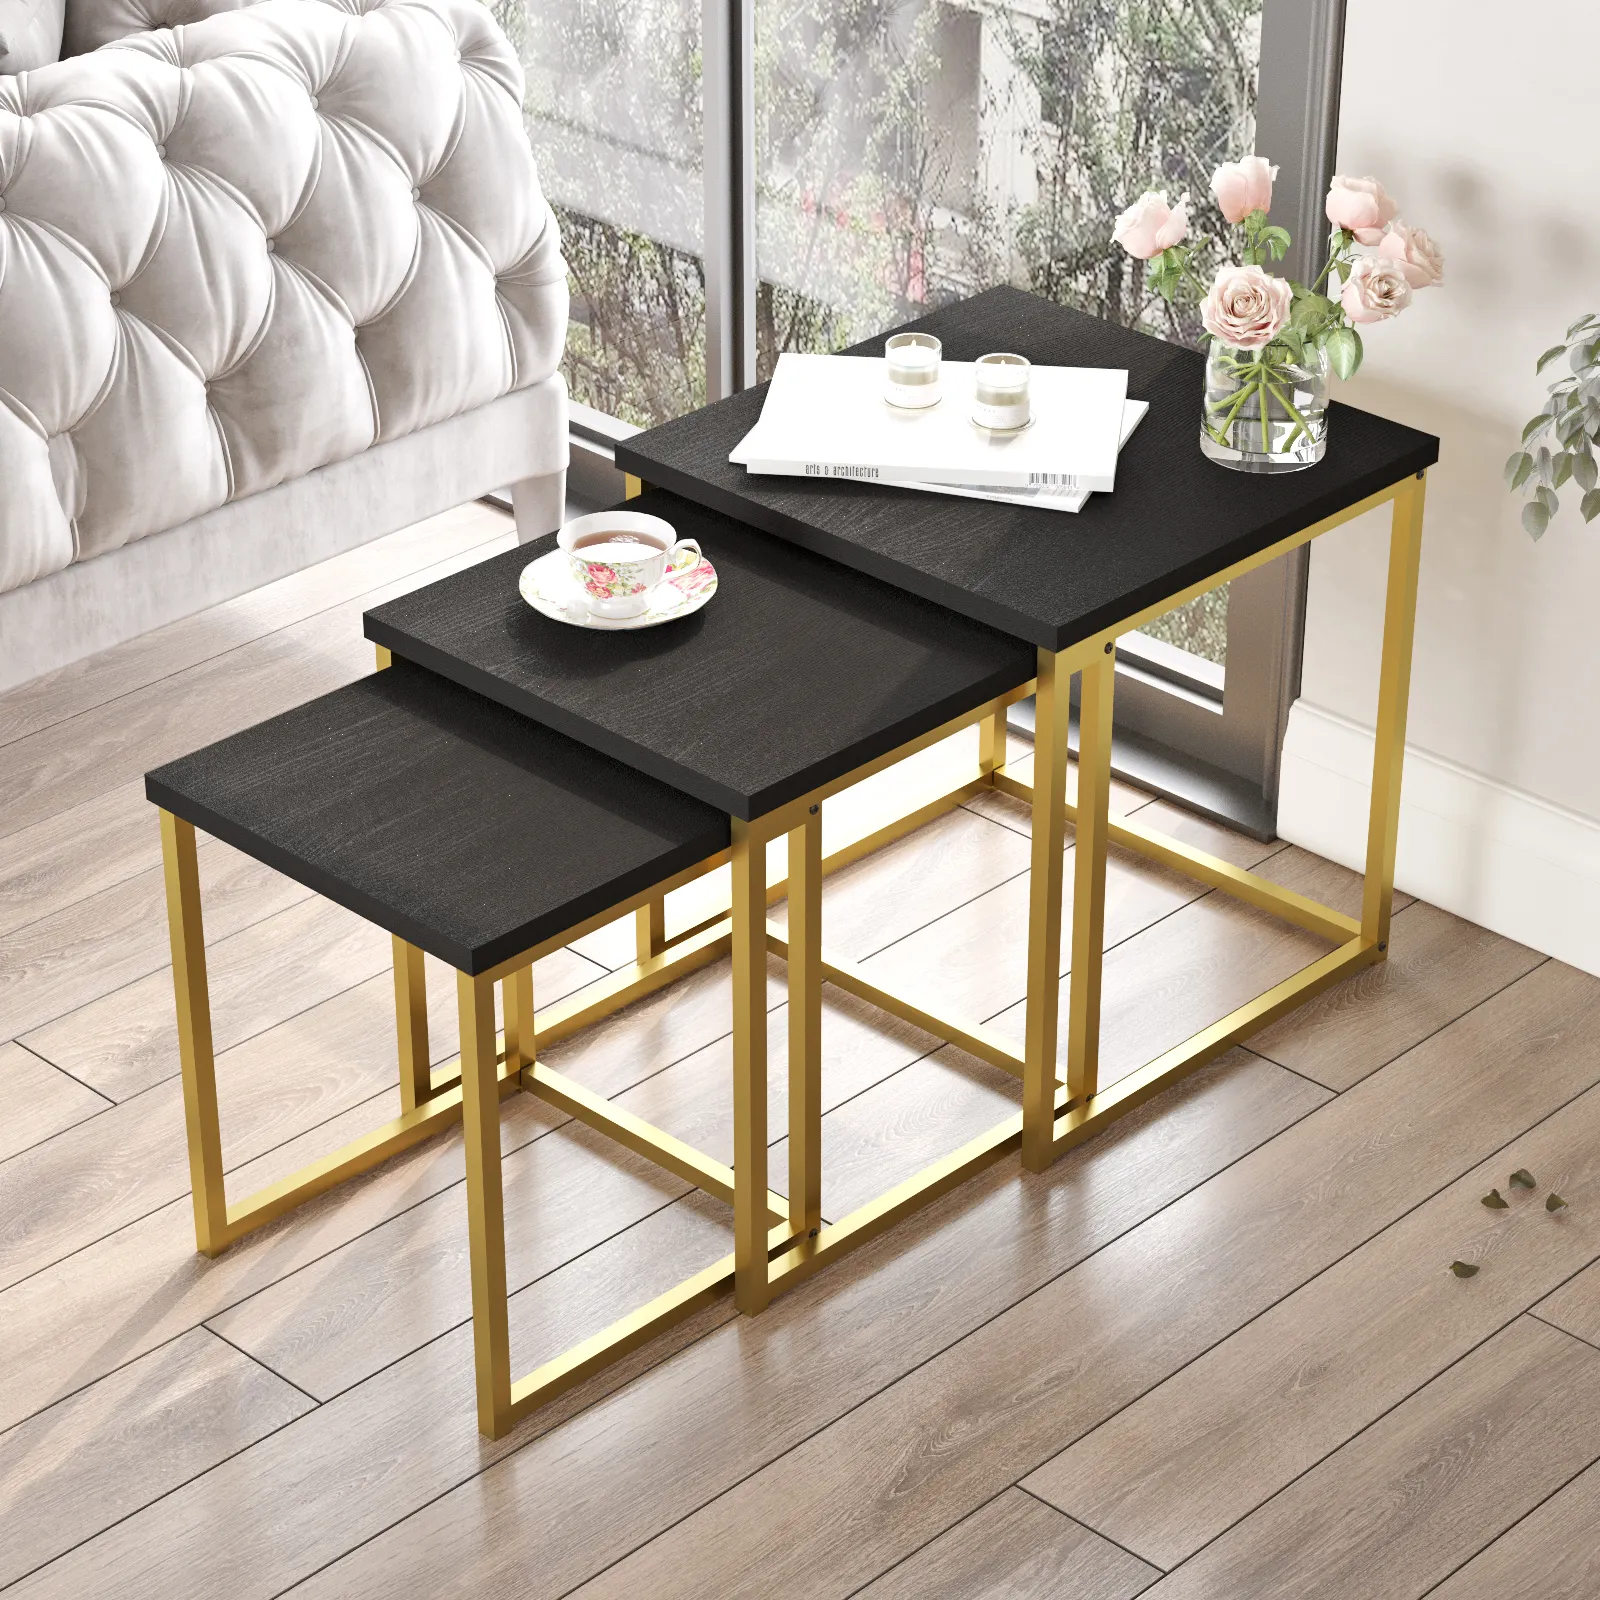 YURUDESIGN VOYAGE 3 NESTING TABLE COFFEE TABLE BEST PRICE VG7-LB HIGH QUALITY